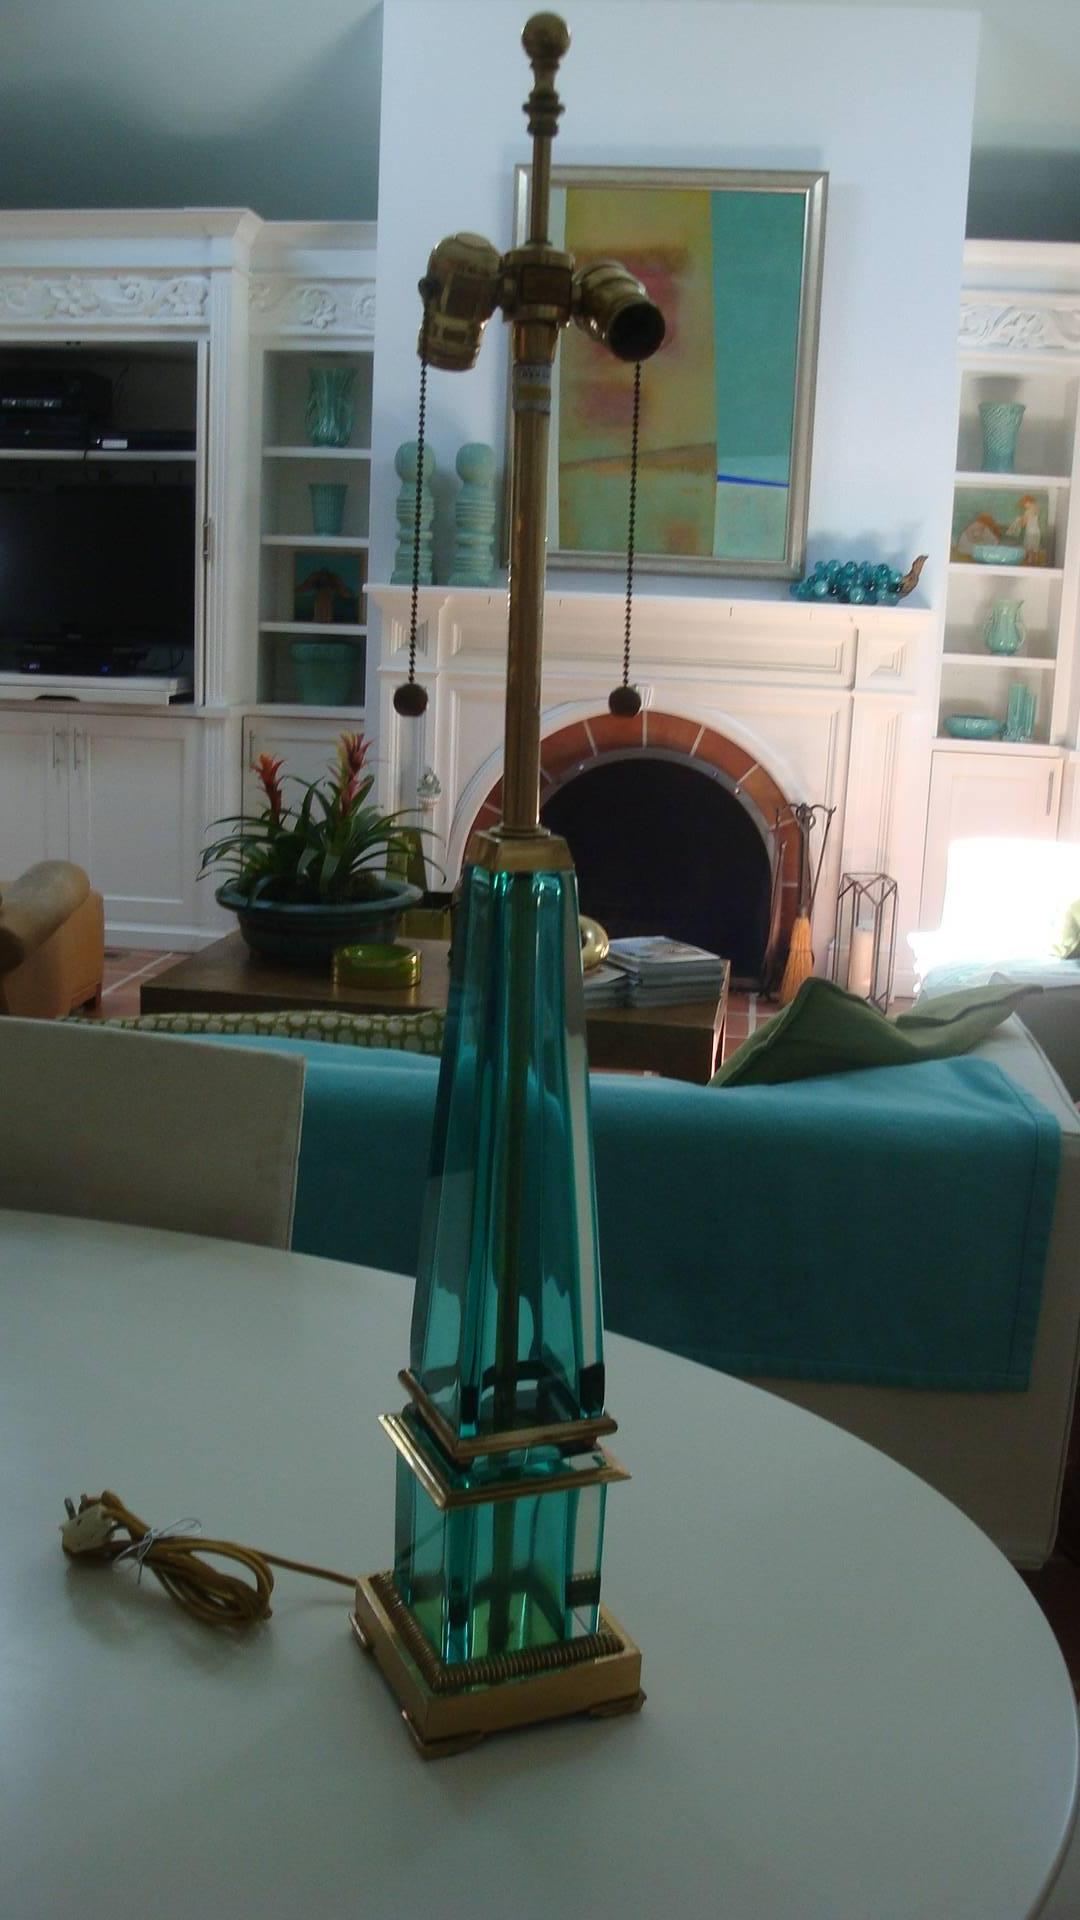 This is a vintage turquoise Murano glass and brass lamp made by the Marbro lamp Co. years ago.